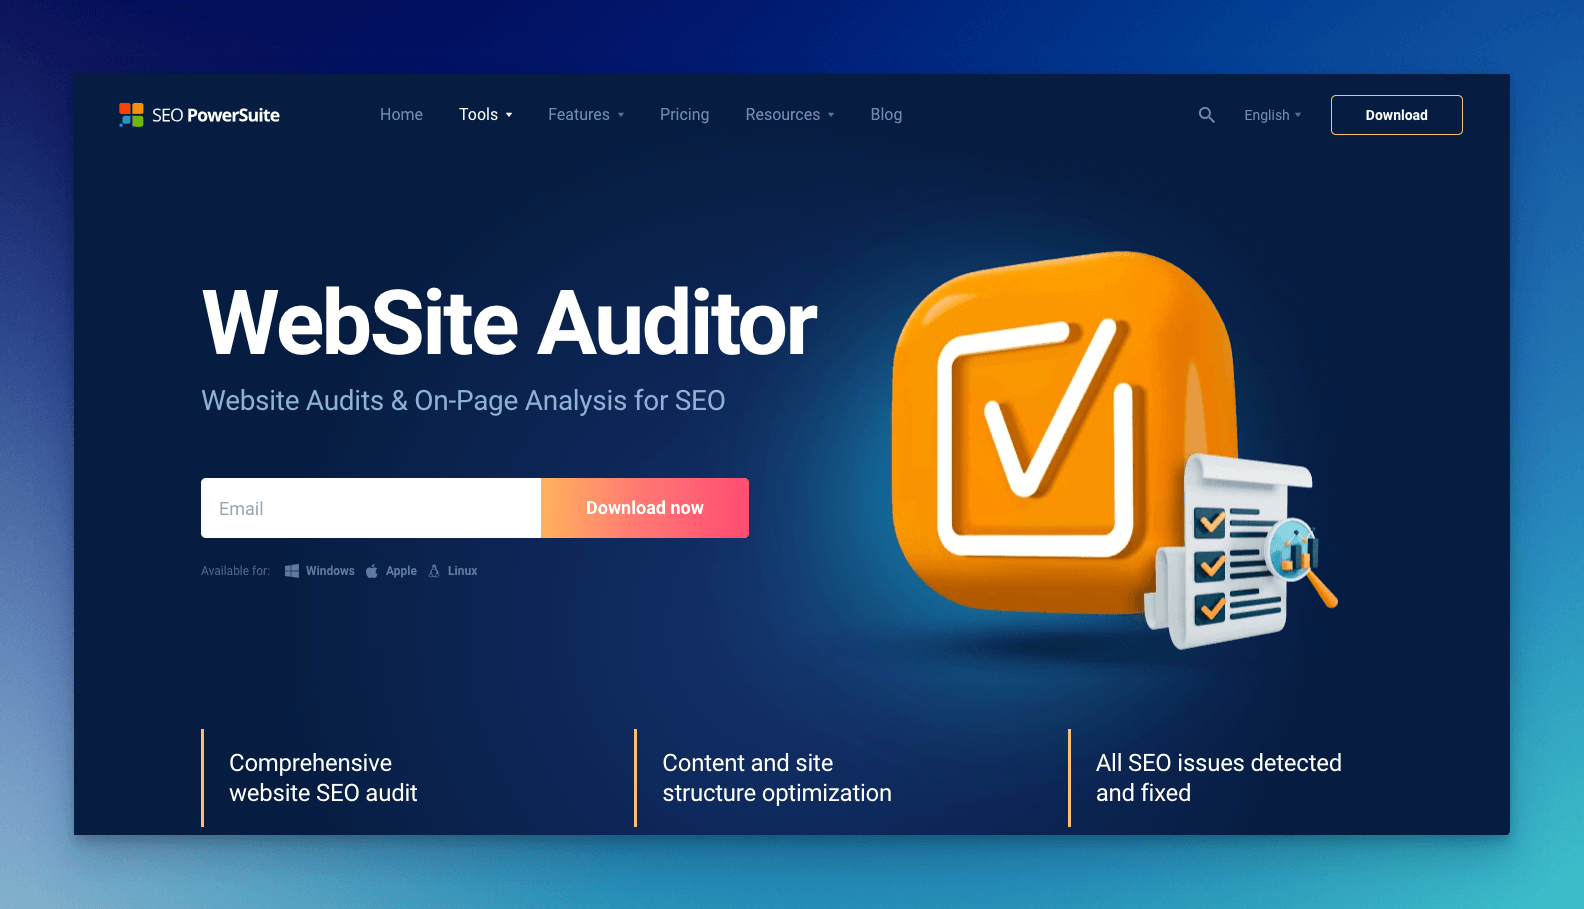 seo powersuite crawler tool homepage with an illustration of a check emojy on the right side and a big text that says "website auditer" on the left side